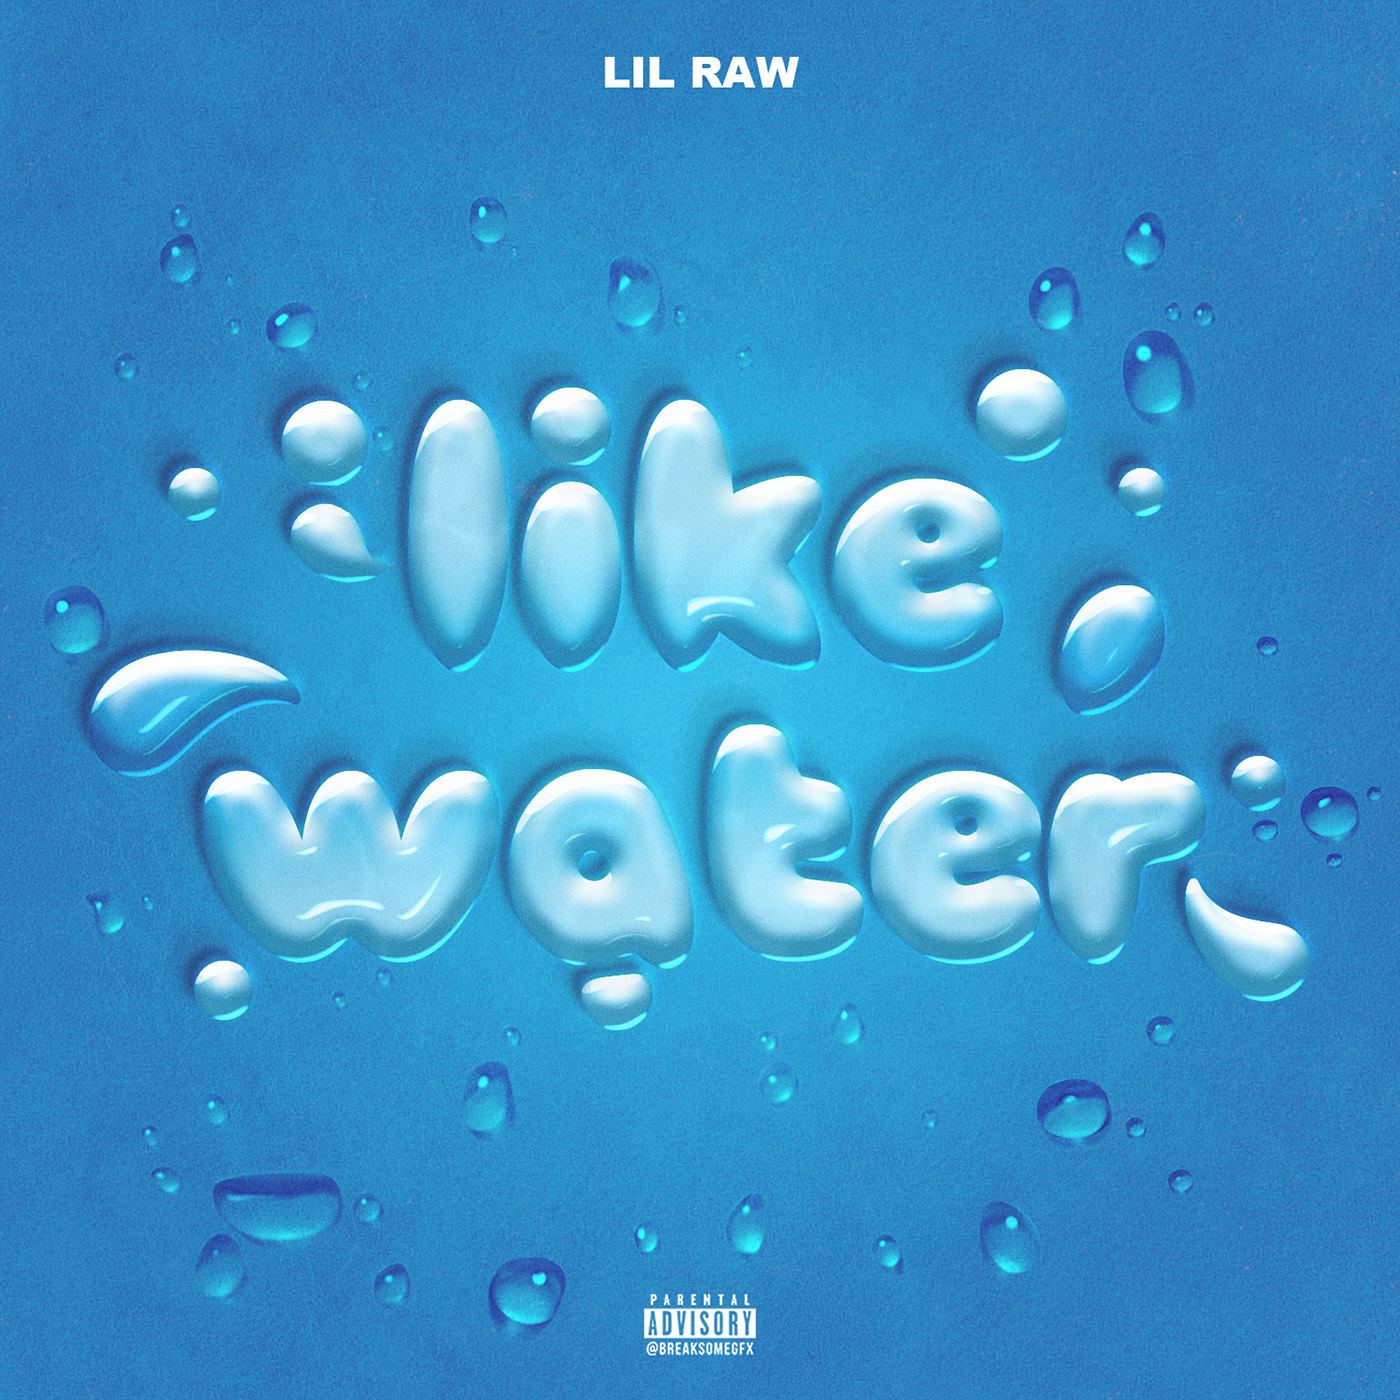 Lil Raw. A little Water. Как вода (like Water) (2011). Much Water little Water. Песня лей вода